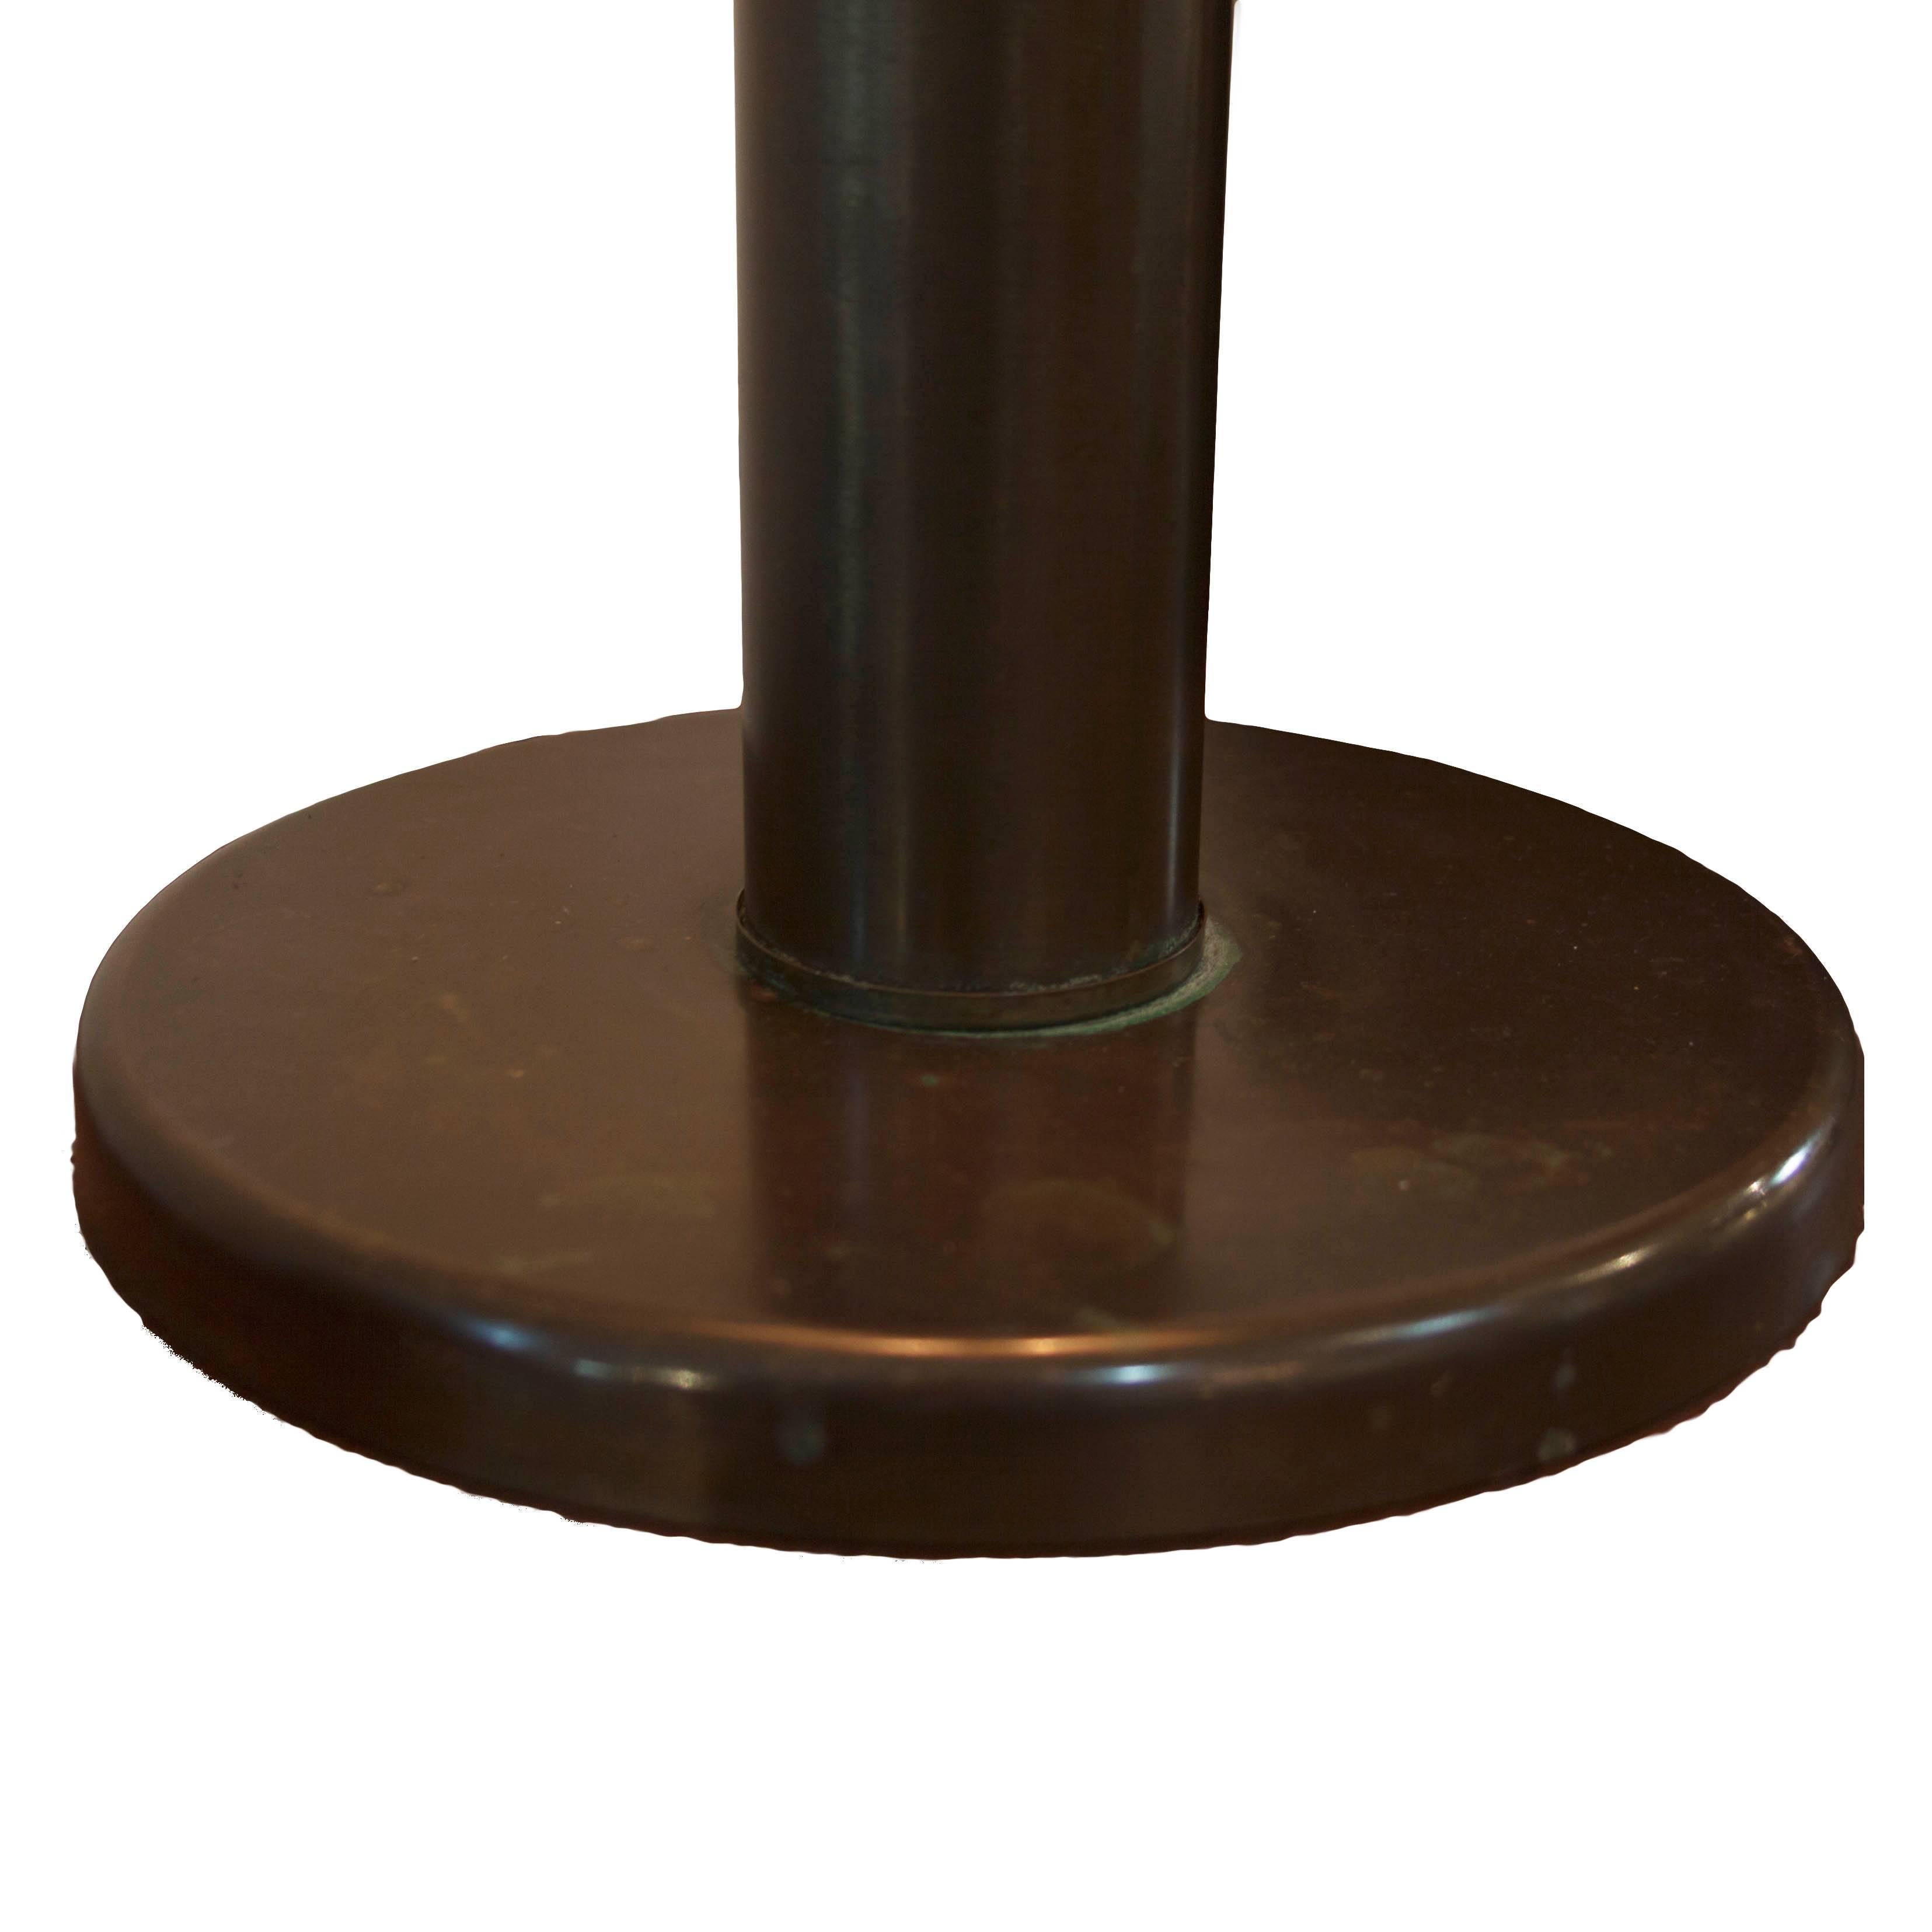 Mid-Century Modern bronze table lamp column with two sockets. Three-way light with linen shade.